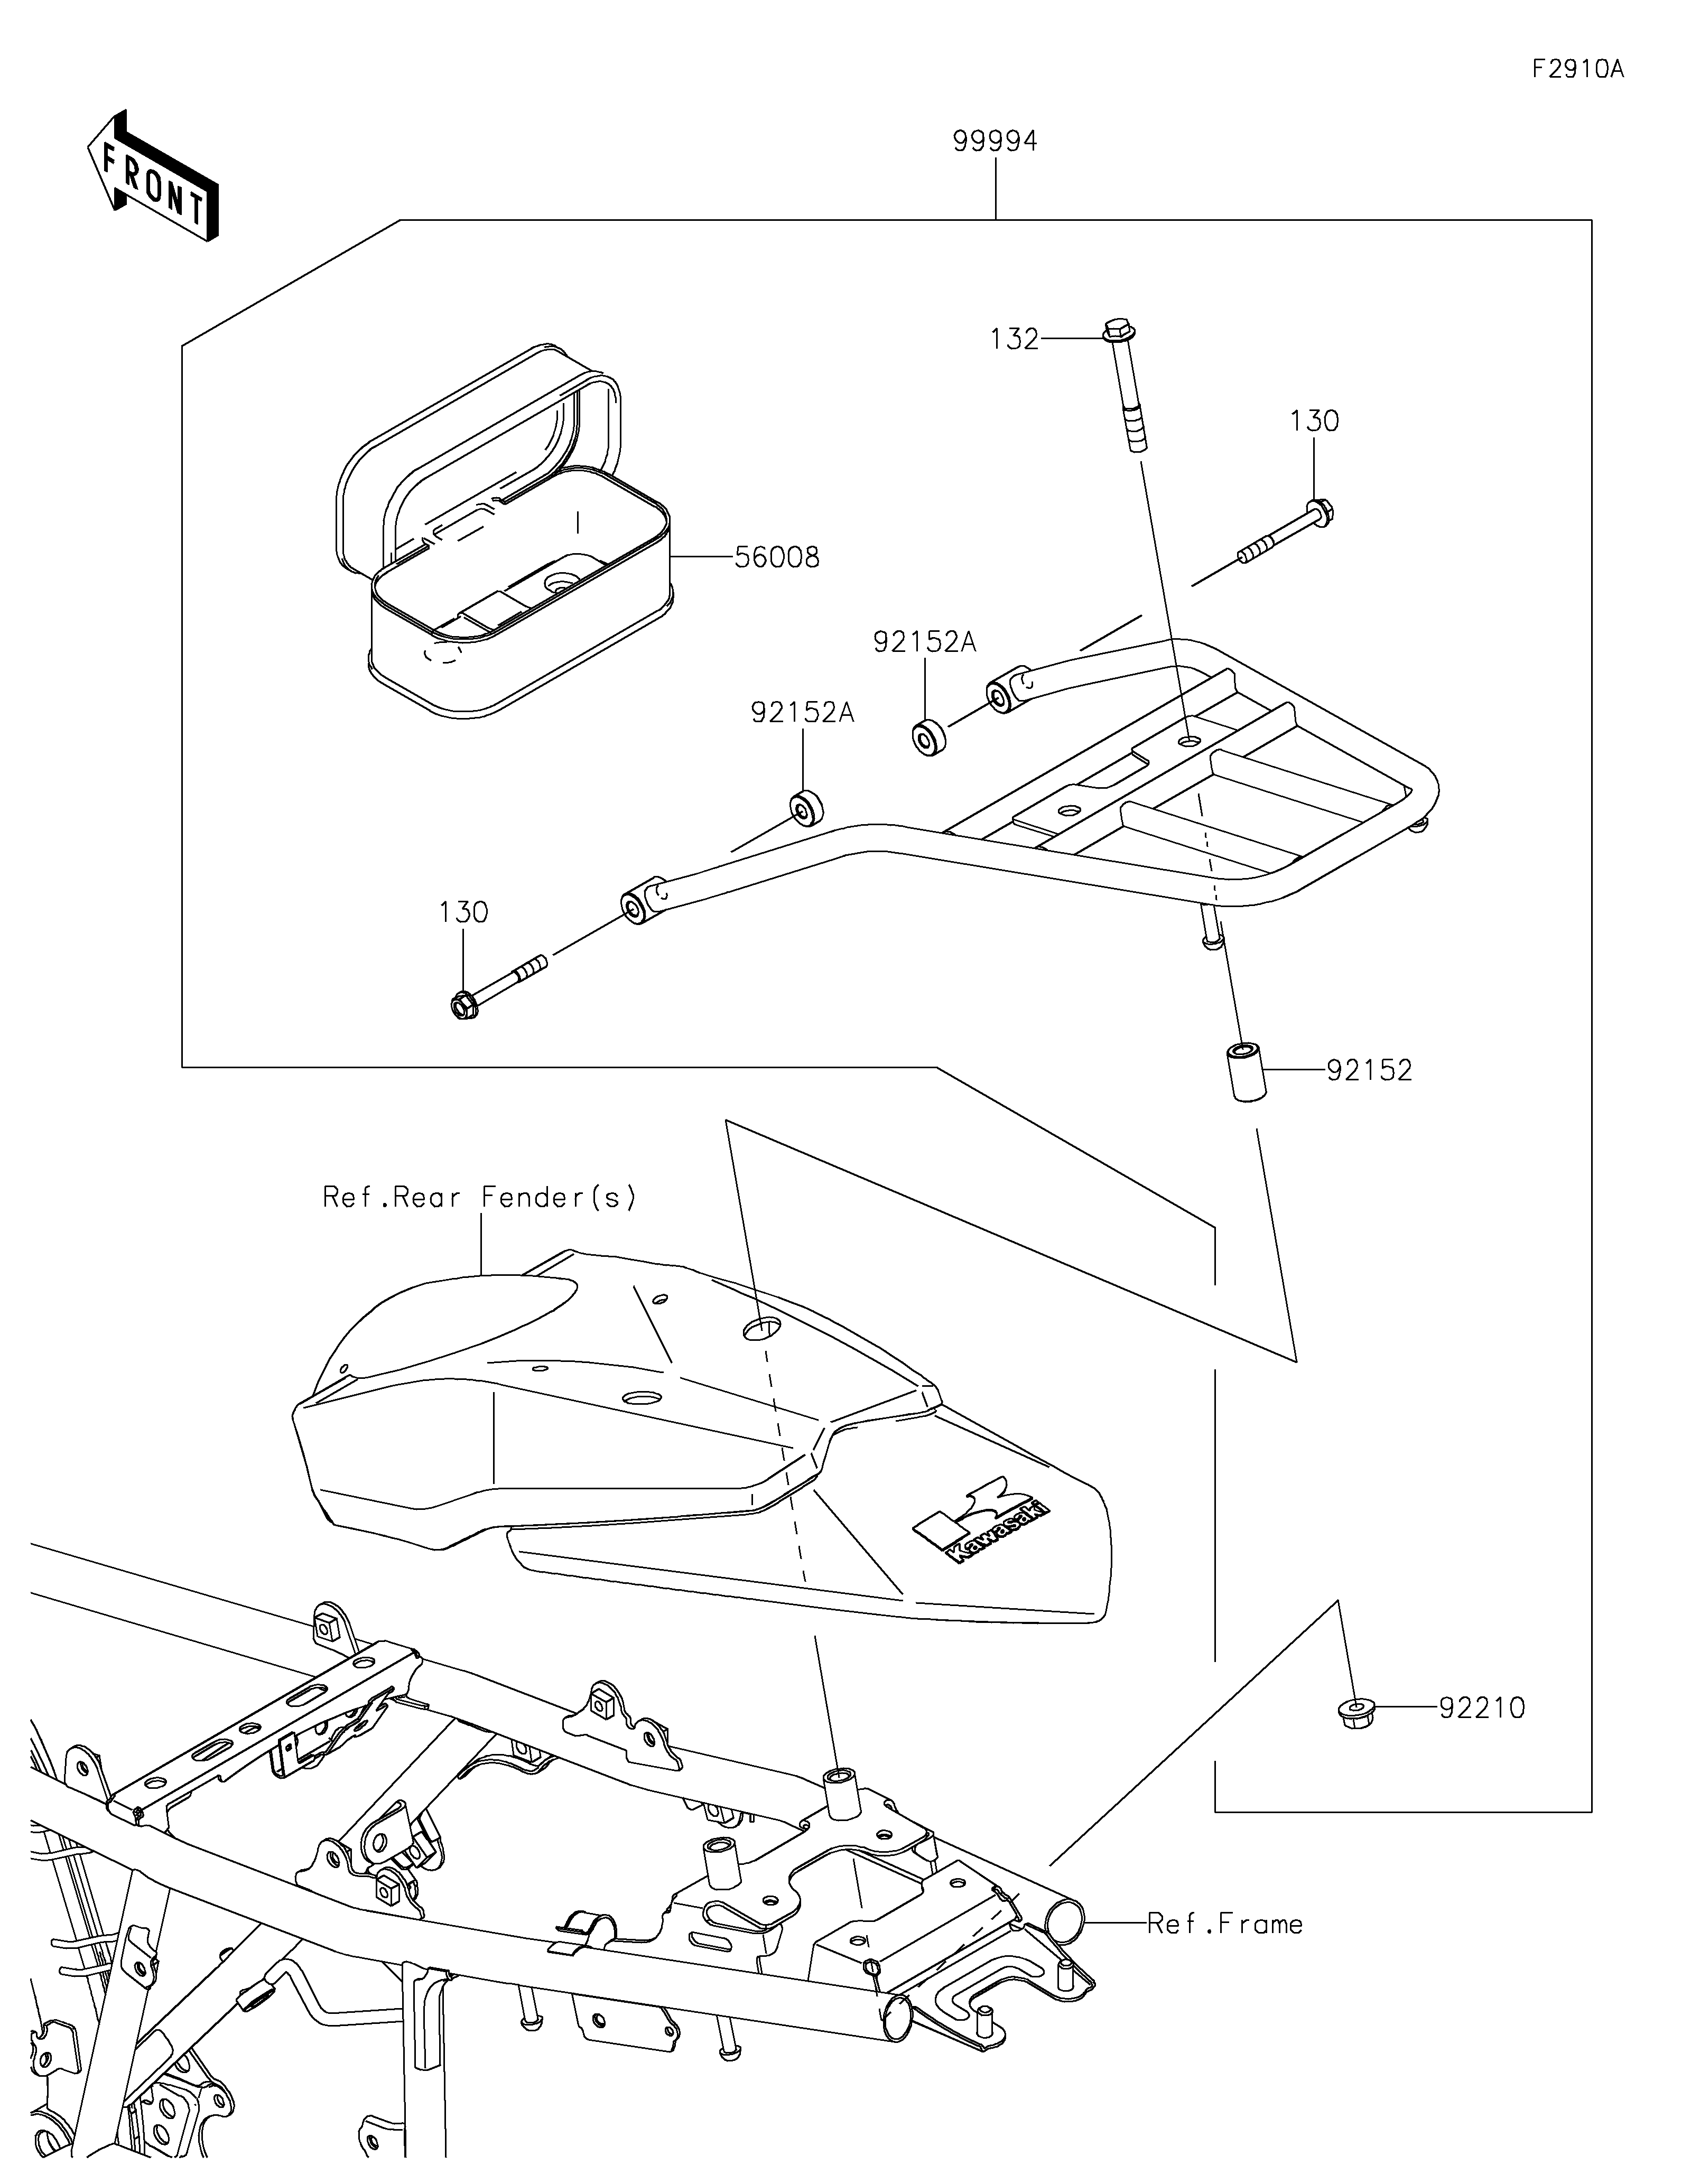 Accessory(Carrier)